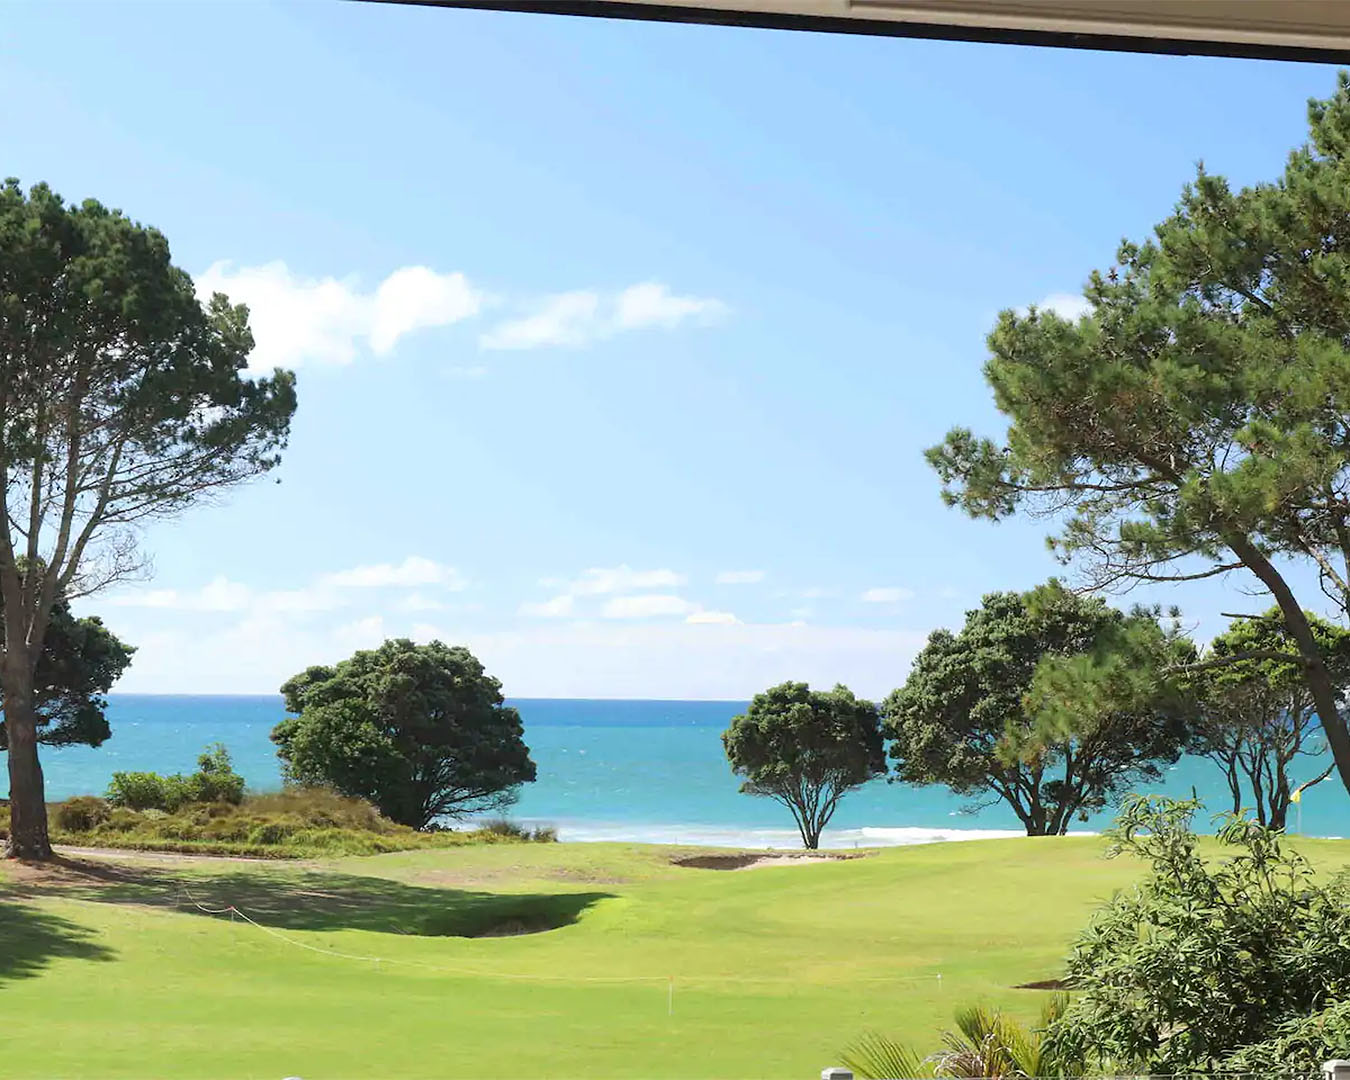 The beautiful sunny view from the dining room at this Waikato stay.